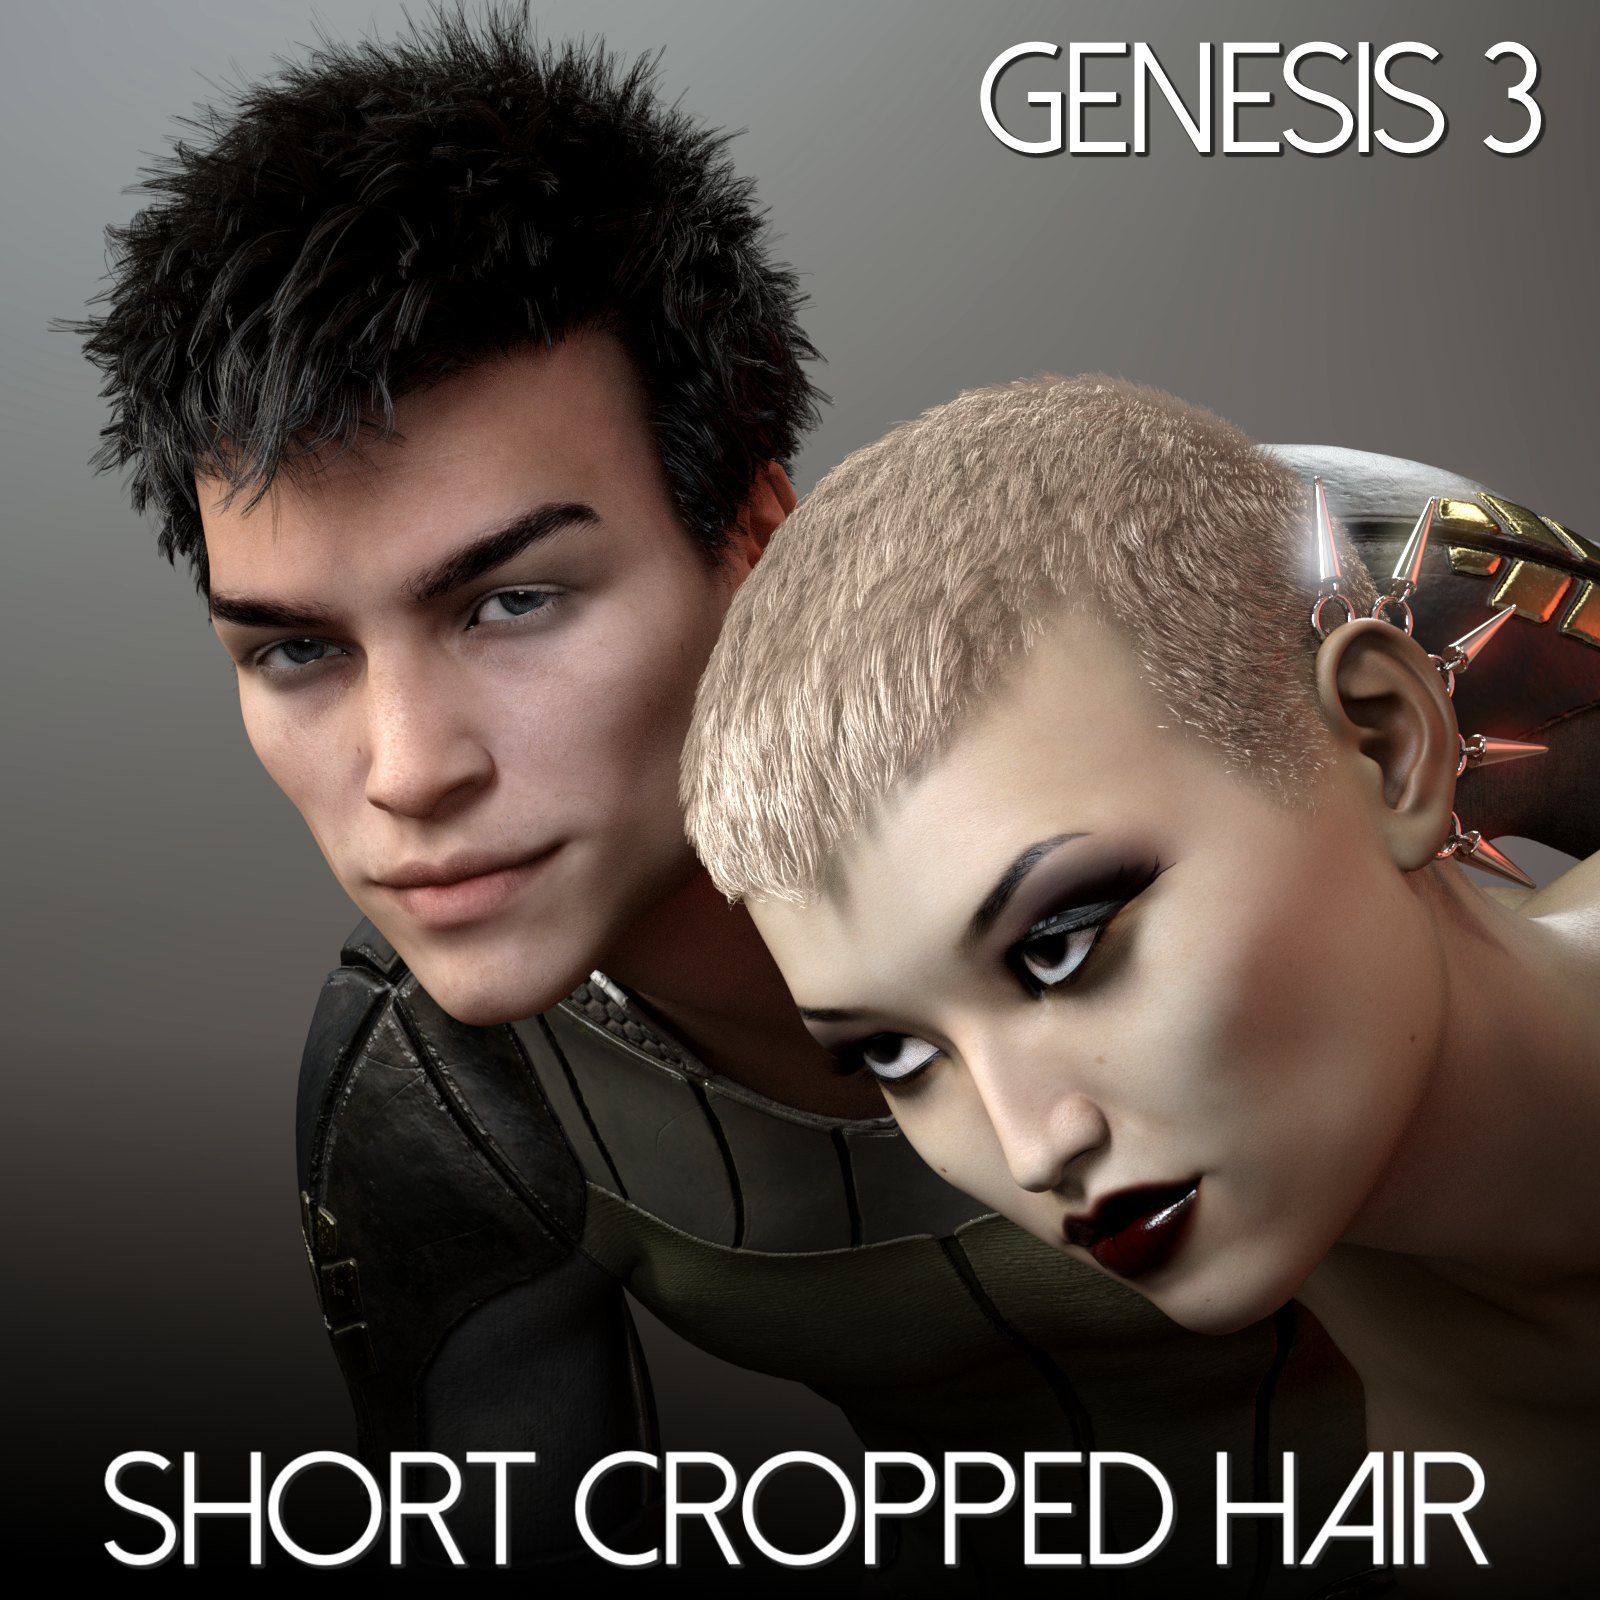 Short Cropped Hair for Genesis 3 Male and Females_DAZ3D下载站